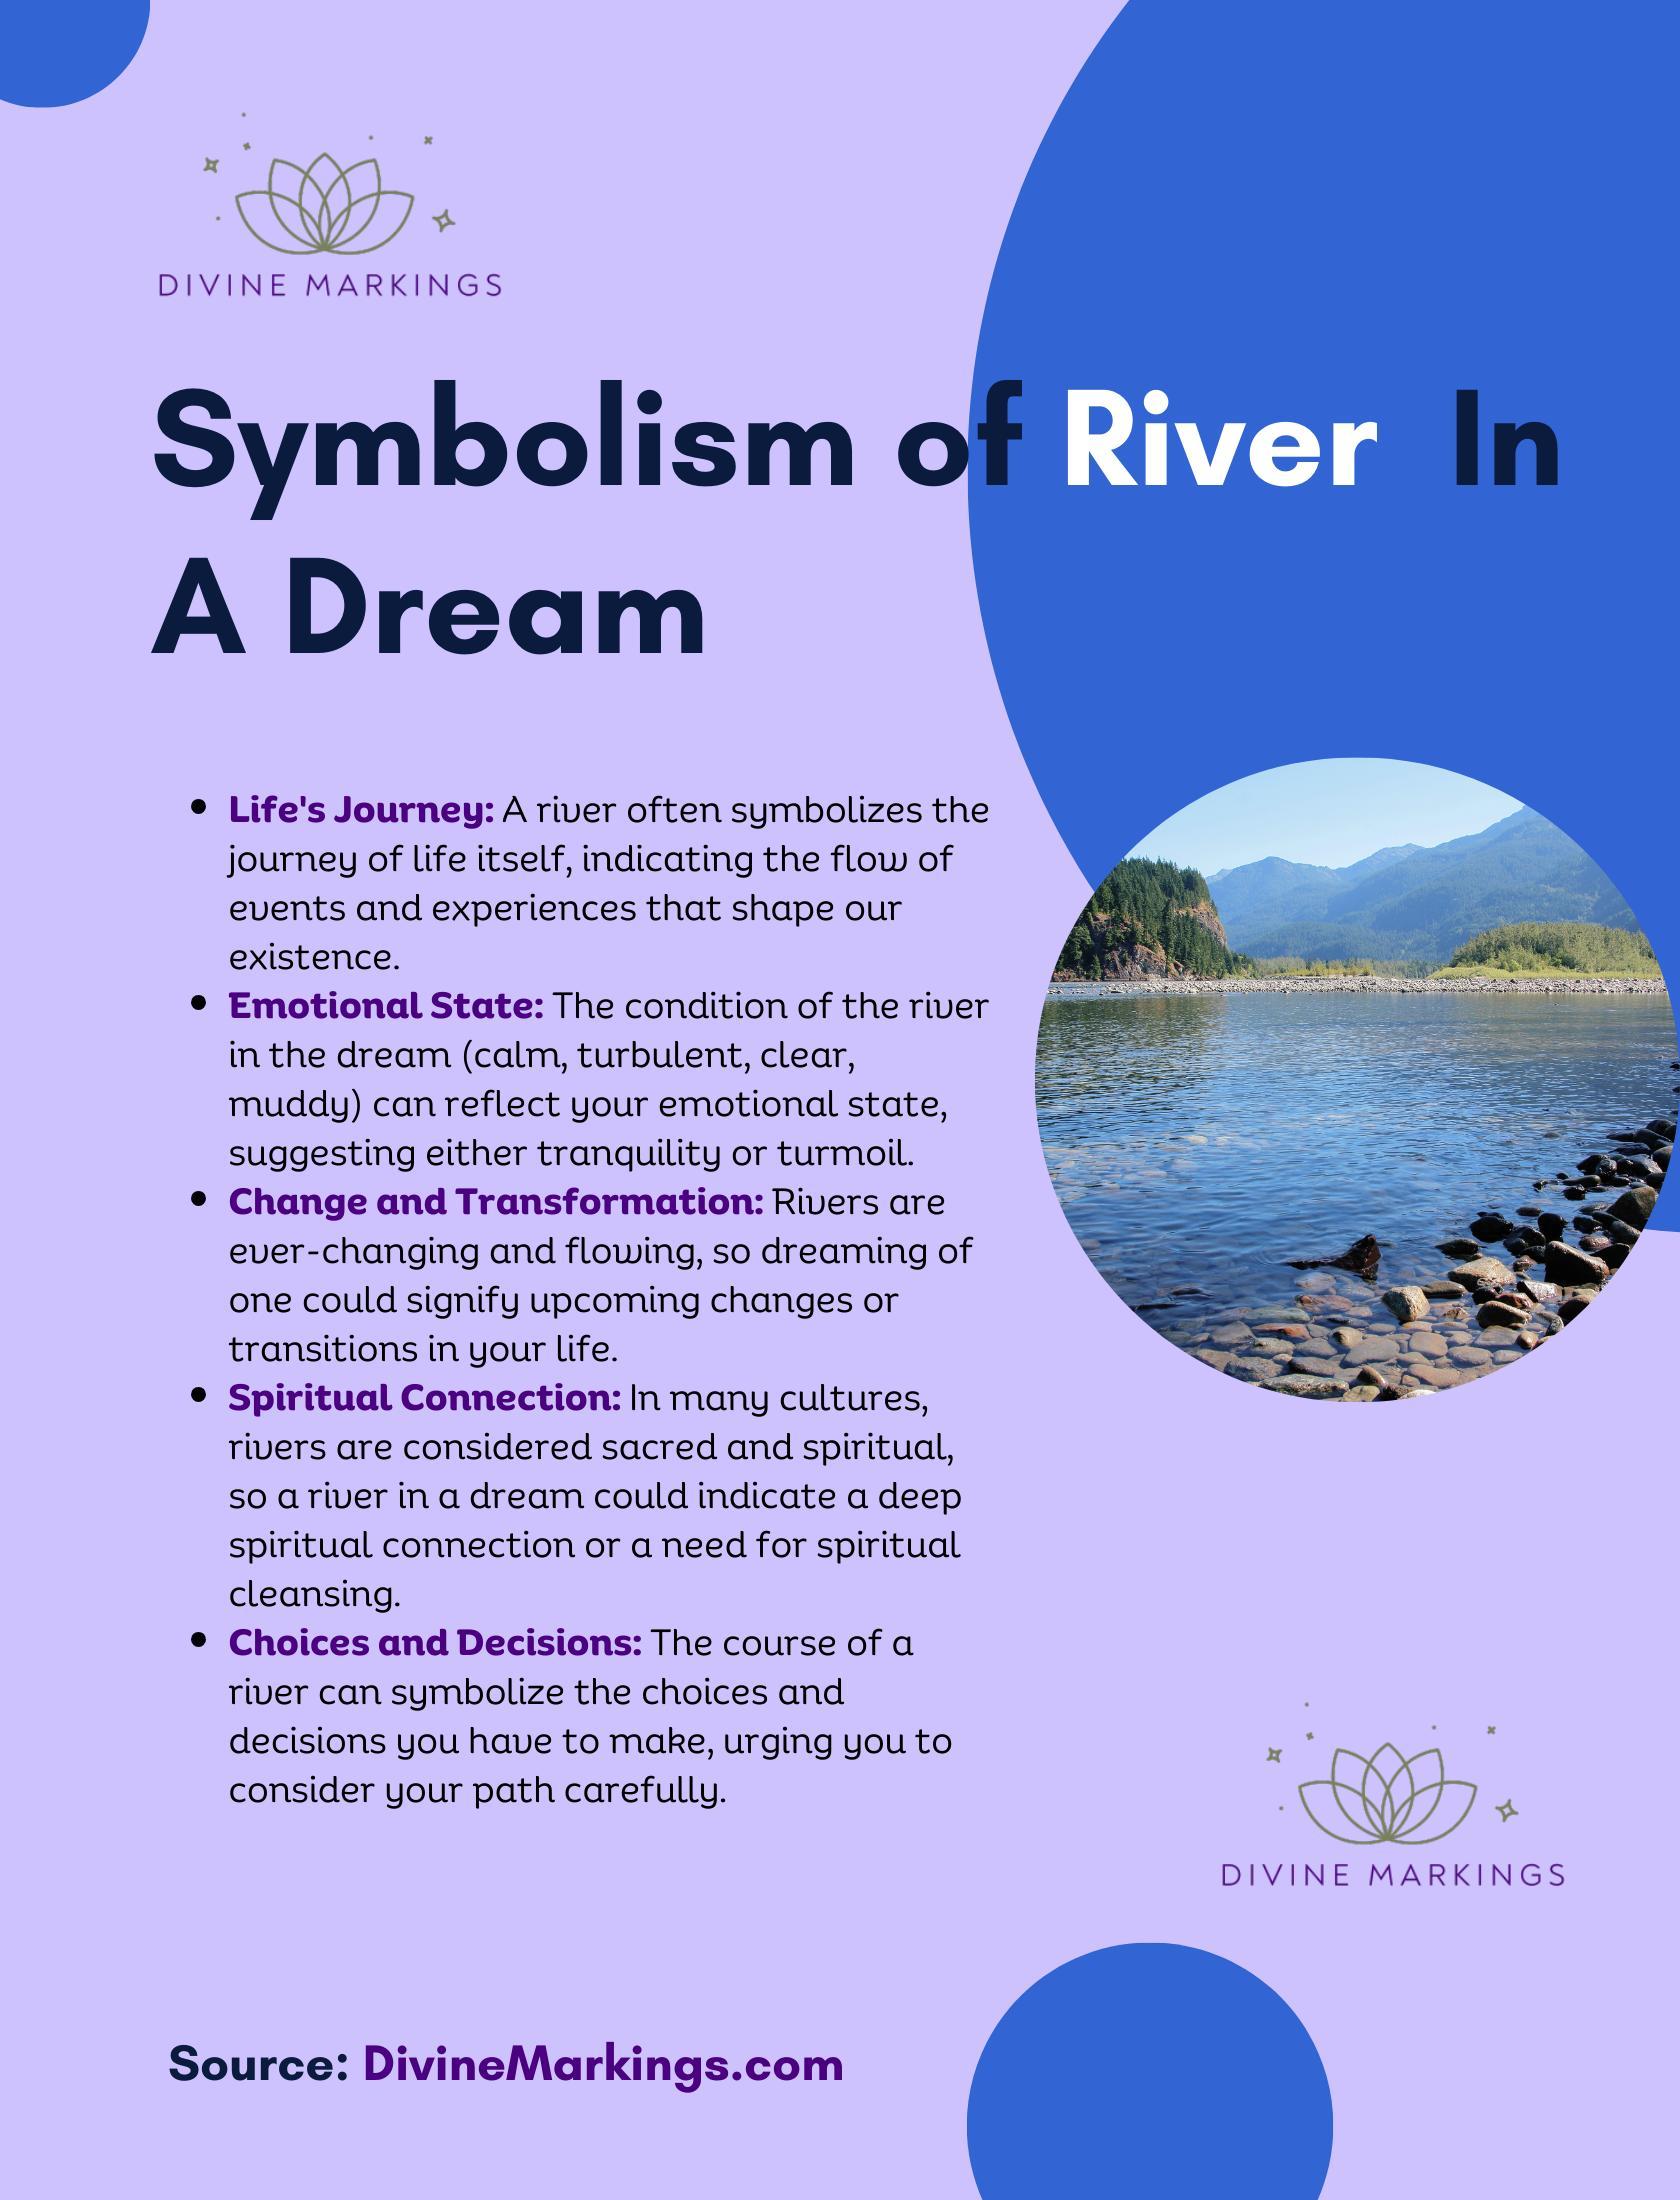 Symbolism of River In A Dream Infographic